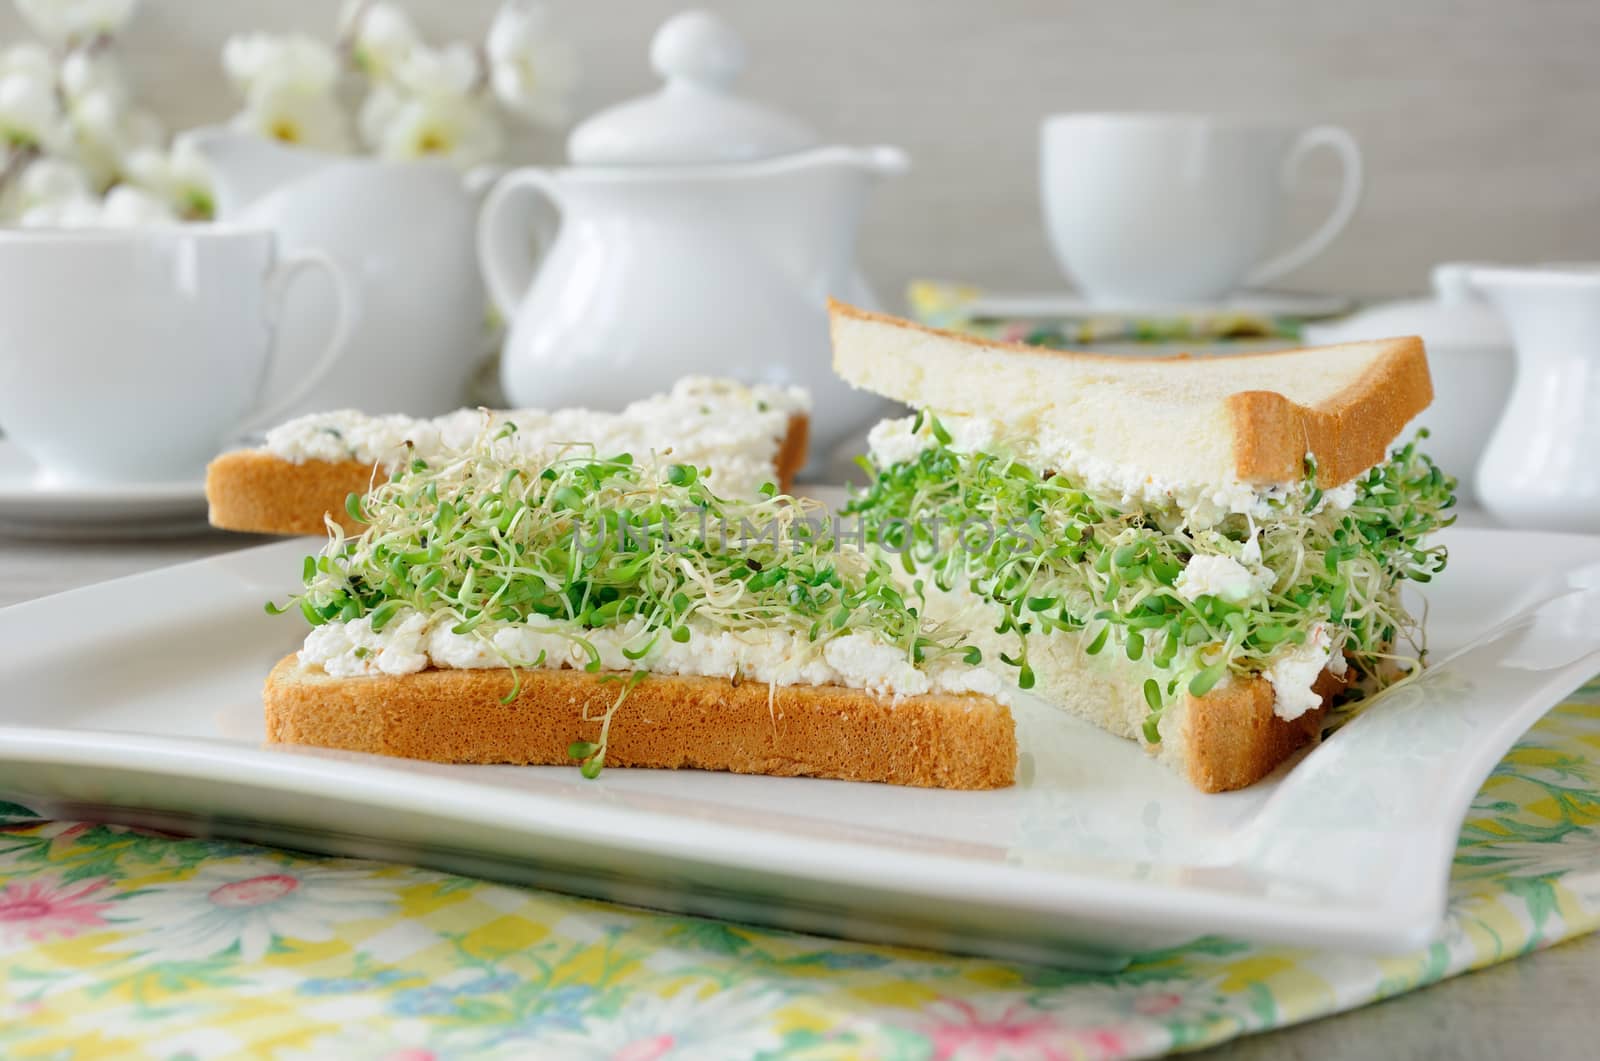 A sandwich of tender, juicy sprouted alfalfa sprouts with soft ricotta and a cup of coffee or tea, which may be better for a break